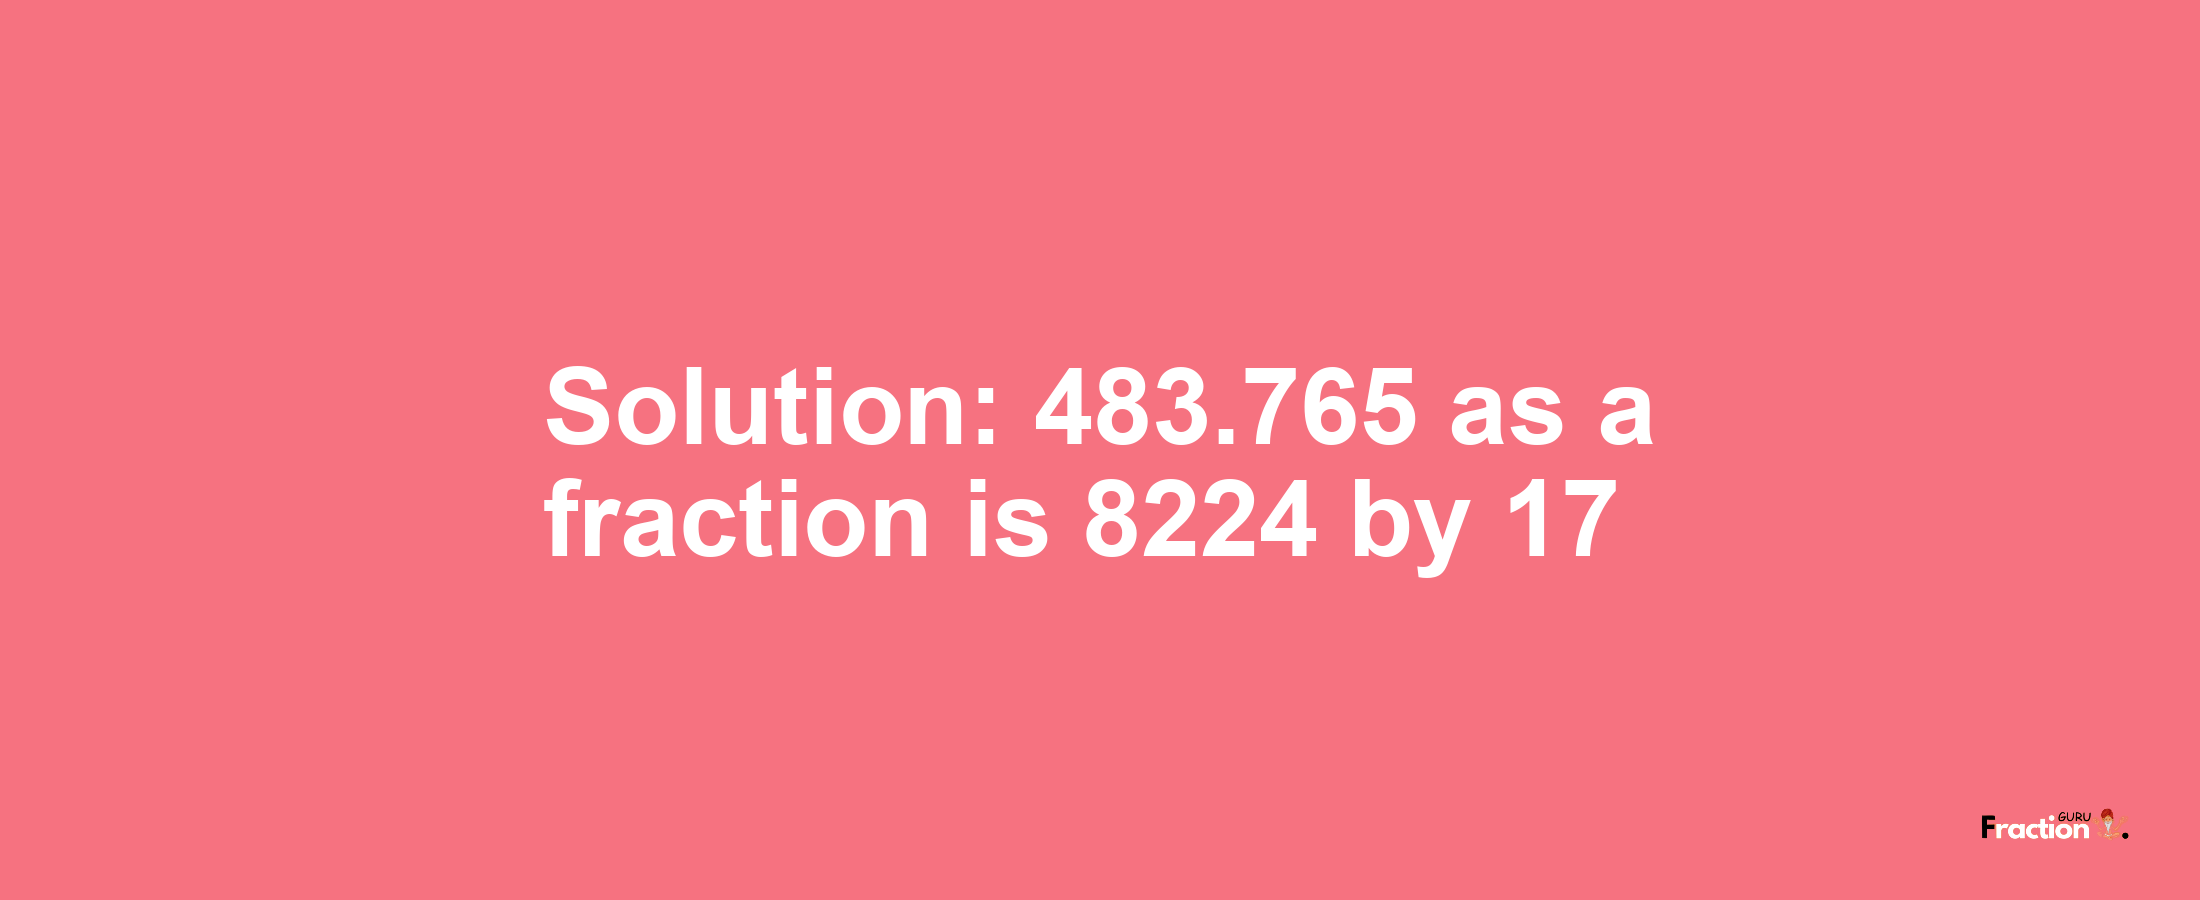 Solution:483.765 as a fraction is 8224/17